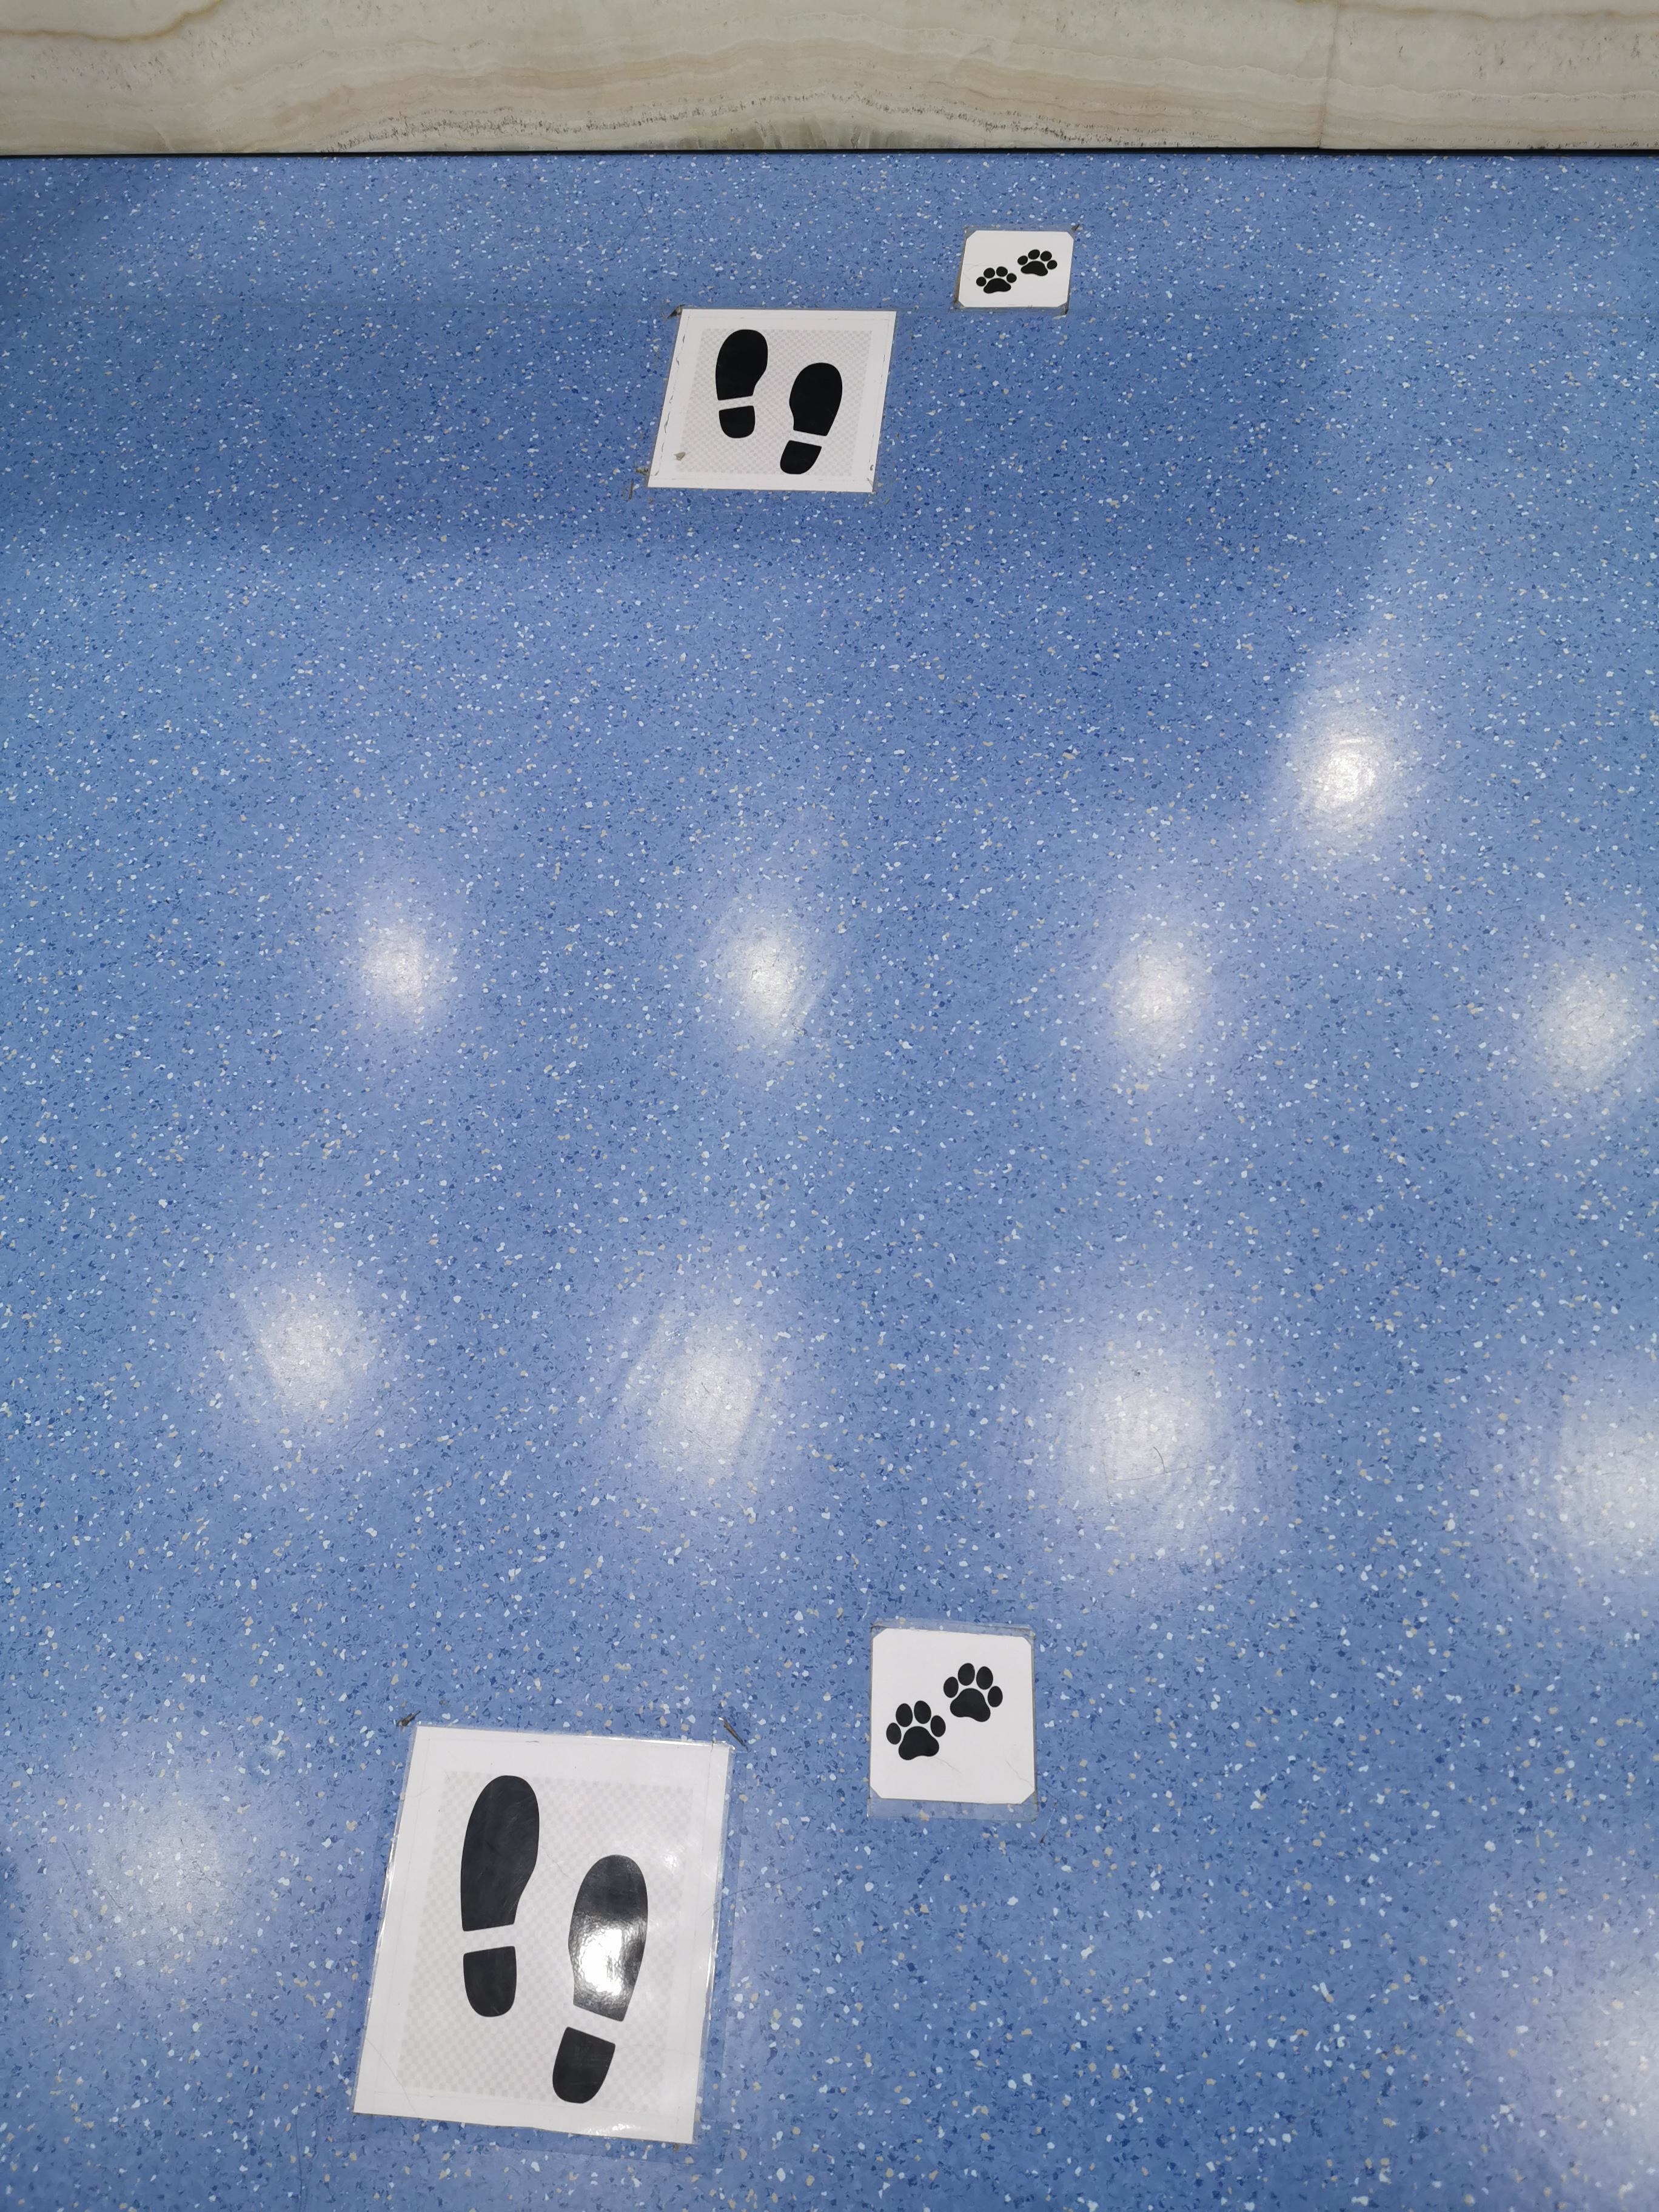 floor markers on the ground of a pet store, one set of footprints and one set of paw prints